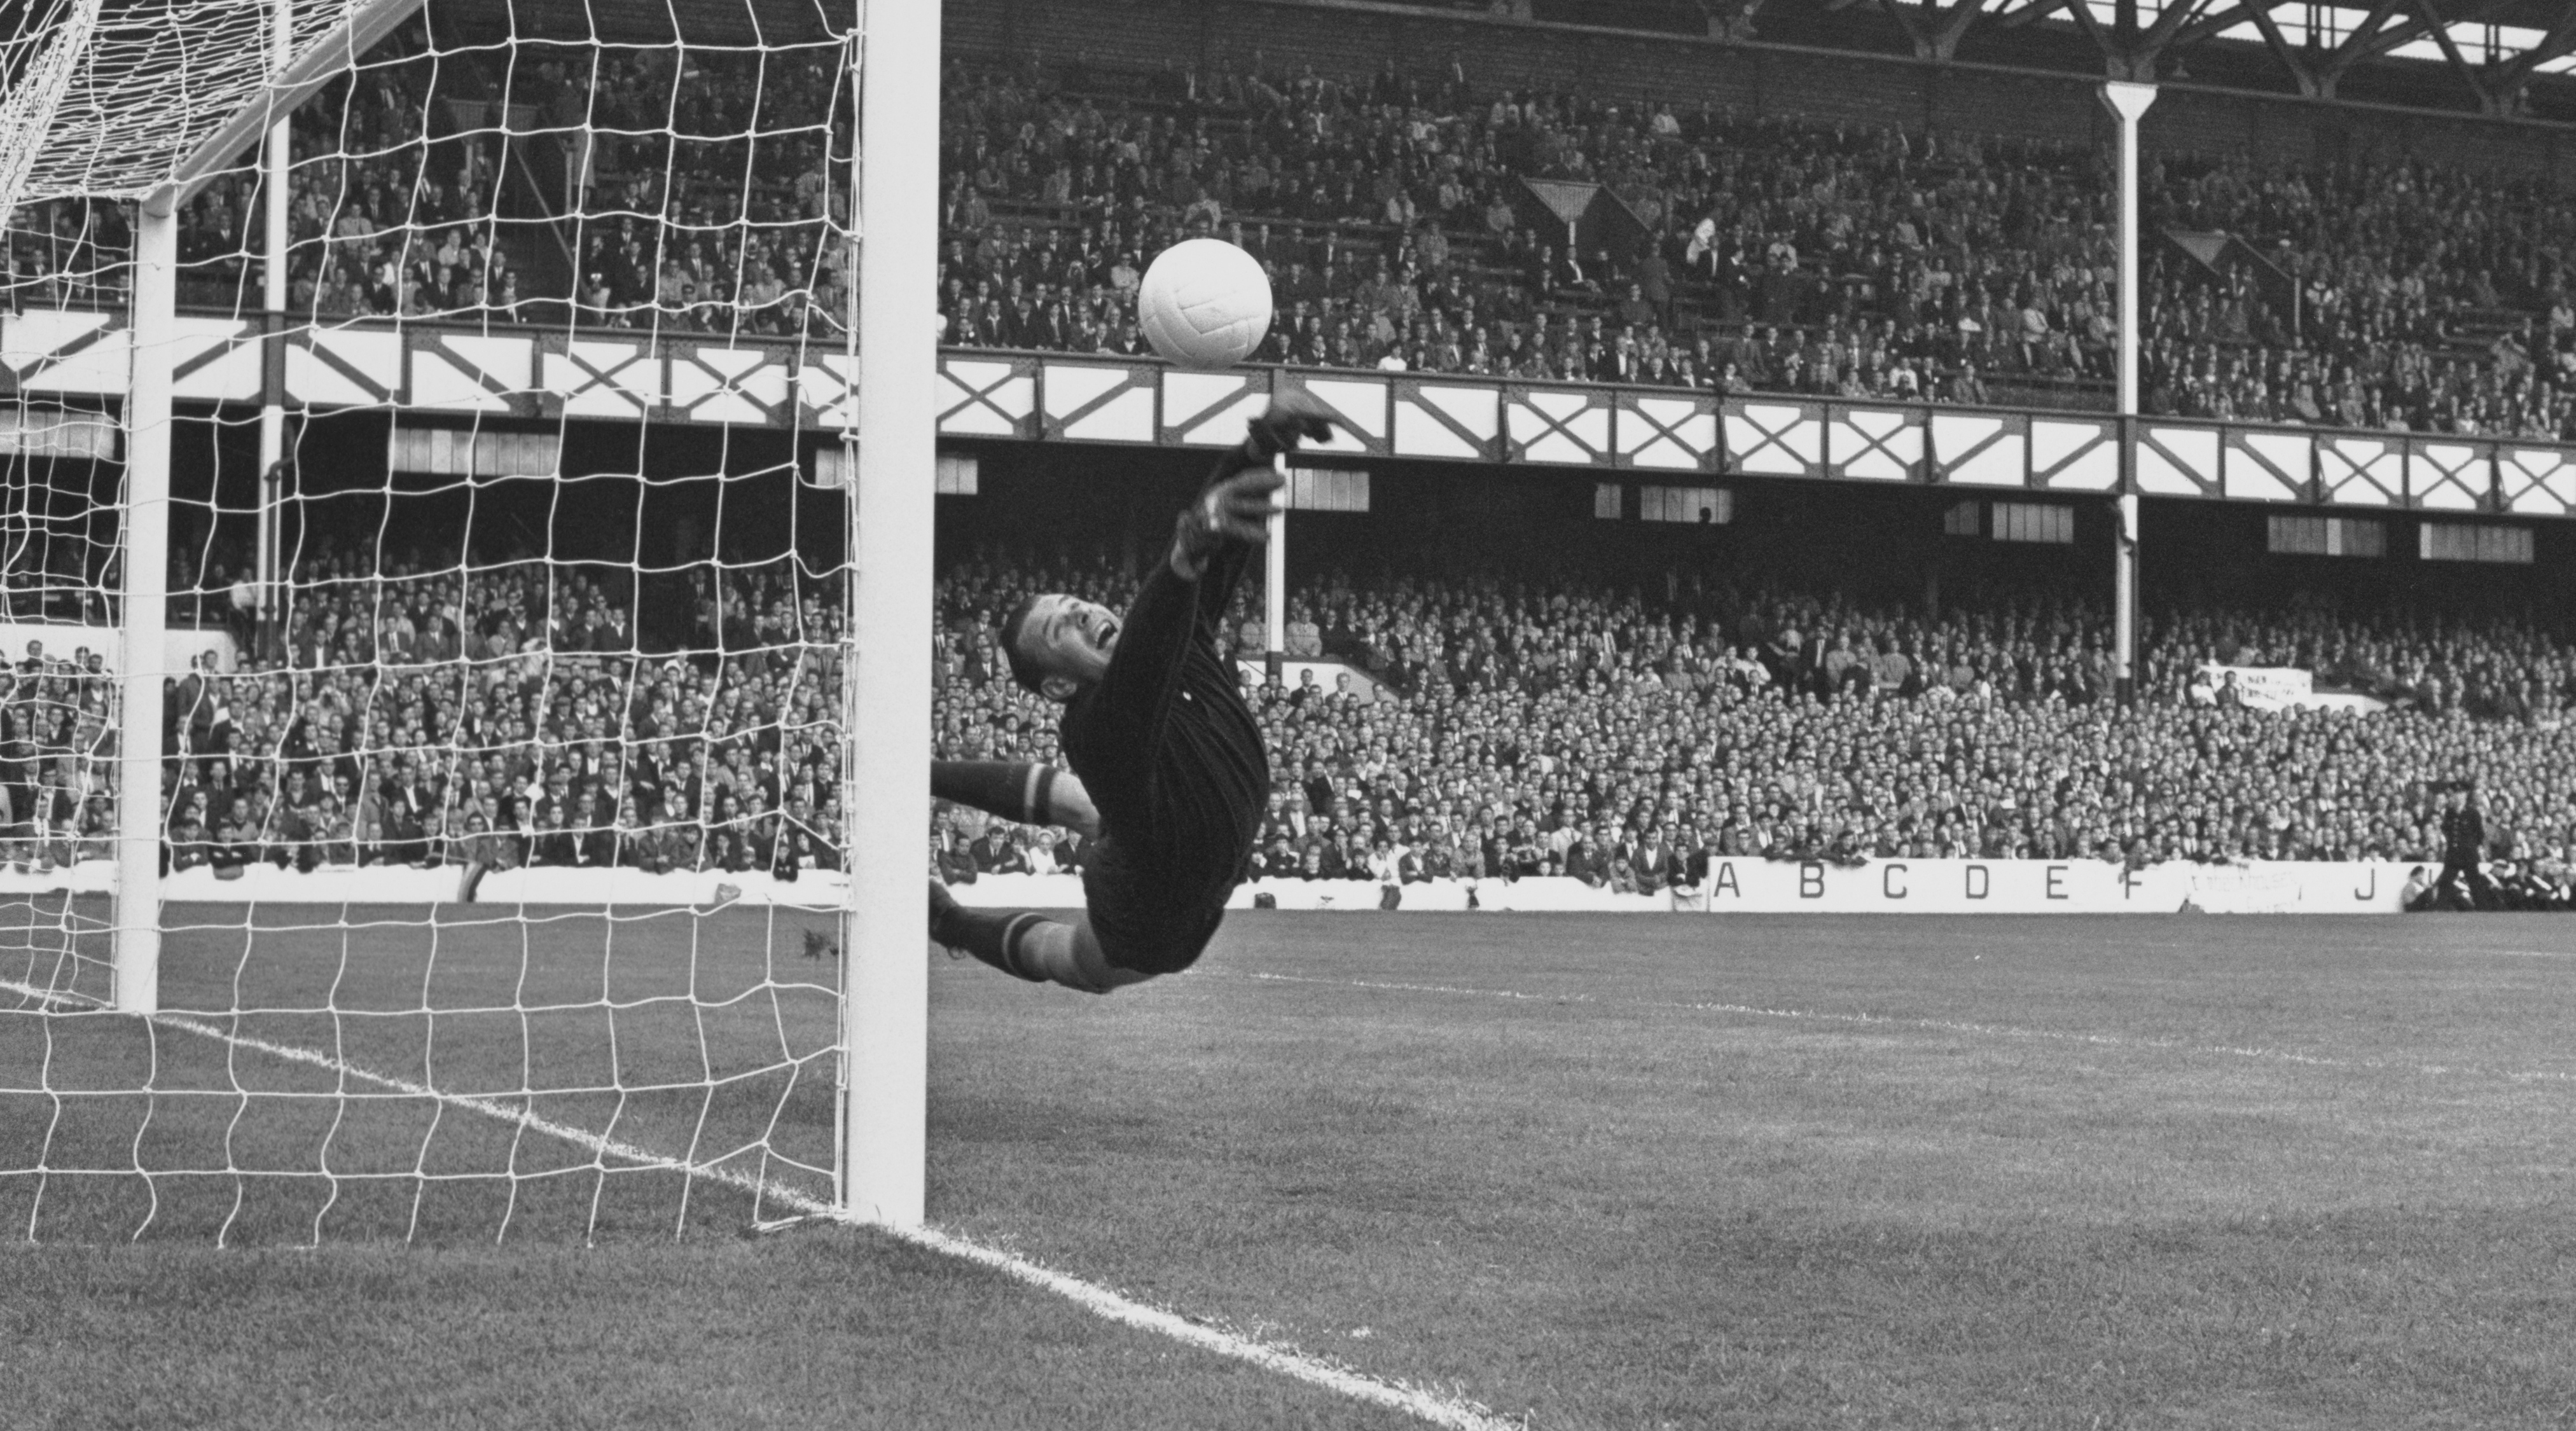 Lev Yashin (1929 - 1990), Goalkeeper for the Soviet Union reaches to make a save during the FIFA World Cup Semi Final match against West Germany on 25th July 1966 at the Goodison Park stadium in Liverpool, England. West Germany won the match 2- 1. (Photo by BIPPA/Central Press/Hulton Archive/Getty Images)